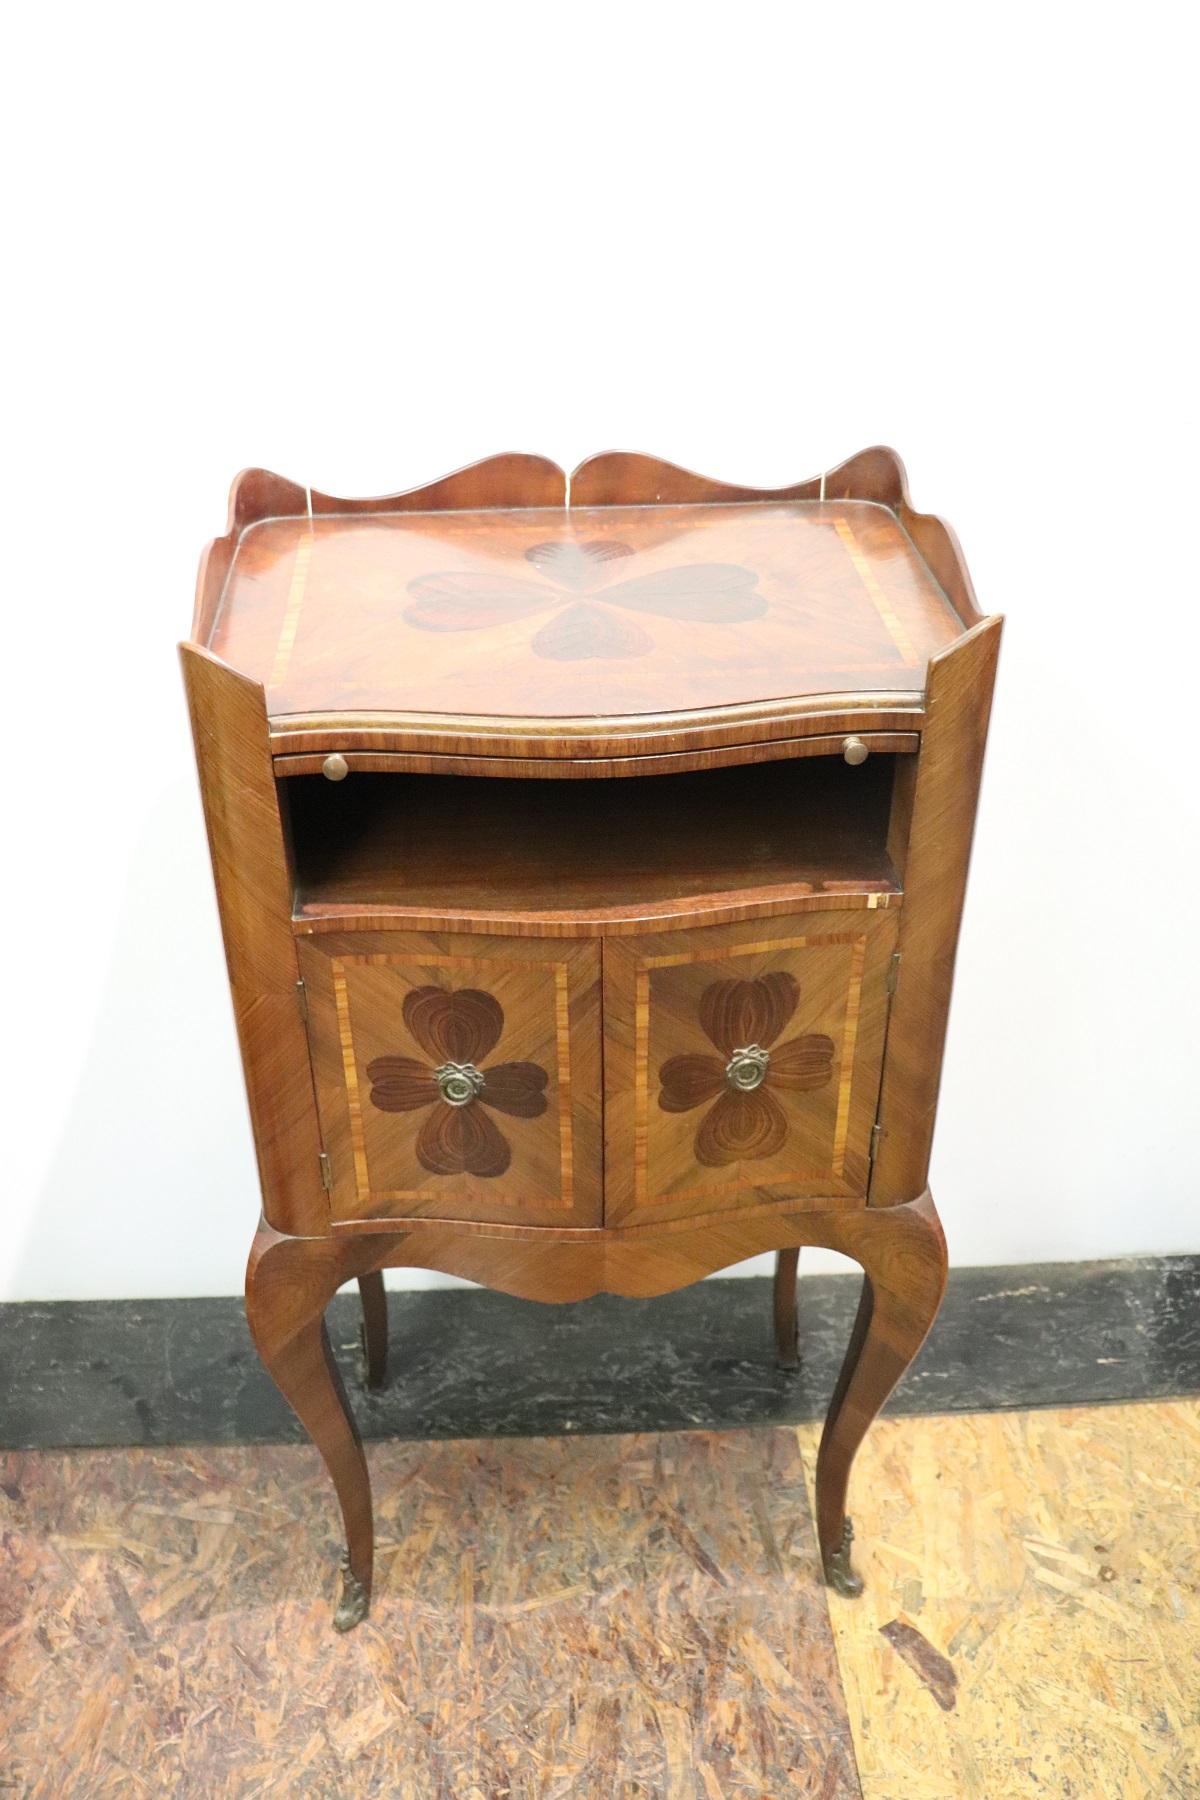 Rare and fine quality Italian Louis XV style 1930s side table or nightstand in inlay wood. The table has a particular legs slender. Fine floral inlay decoration on the sides with cloverleaf. The four-leaf clover in Italy is a plant considered to